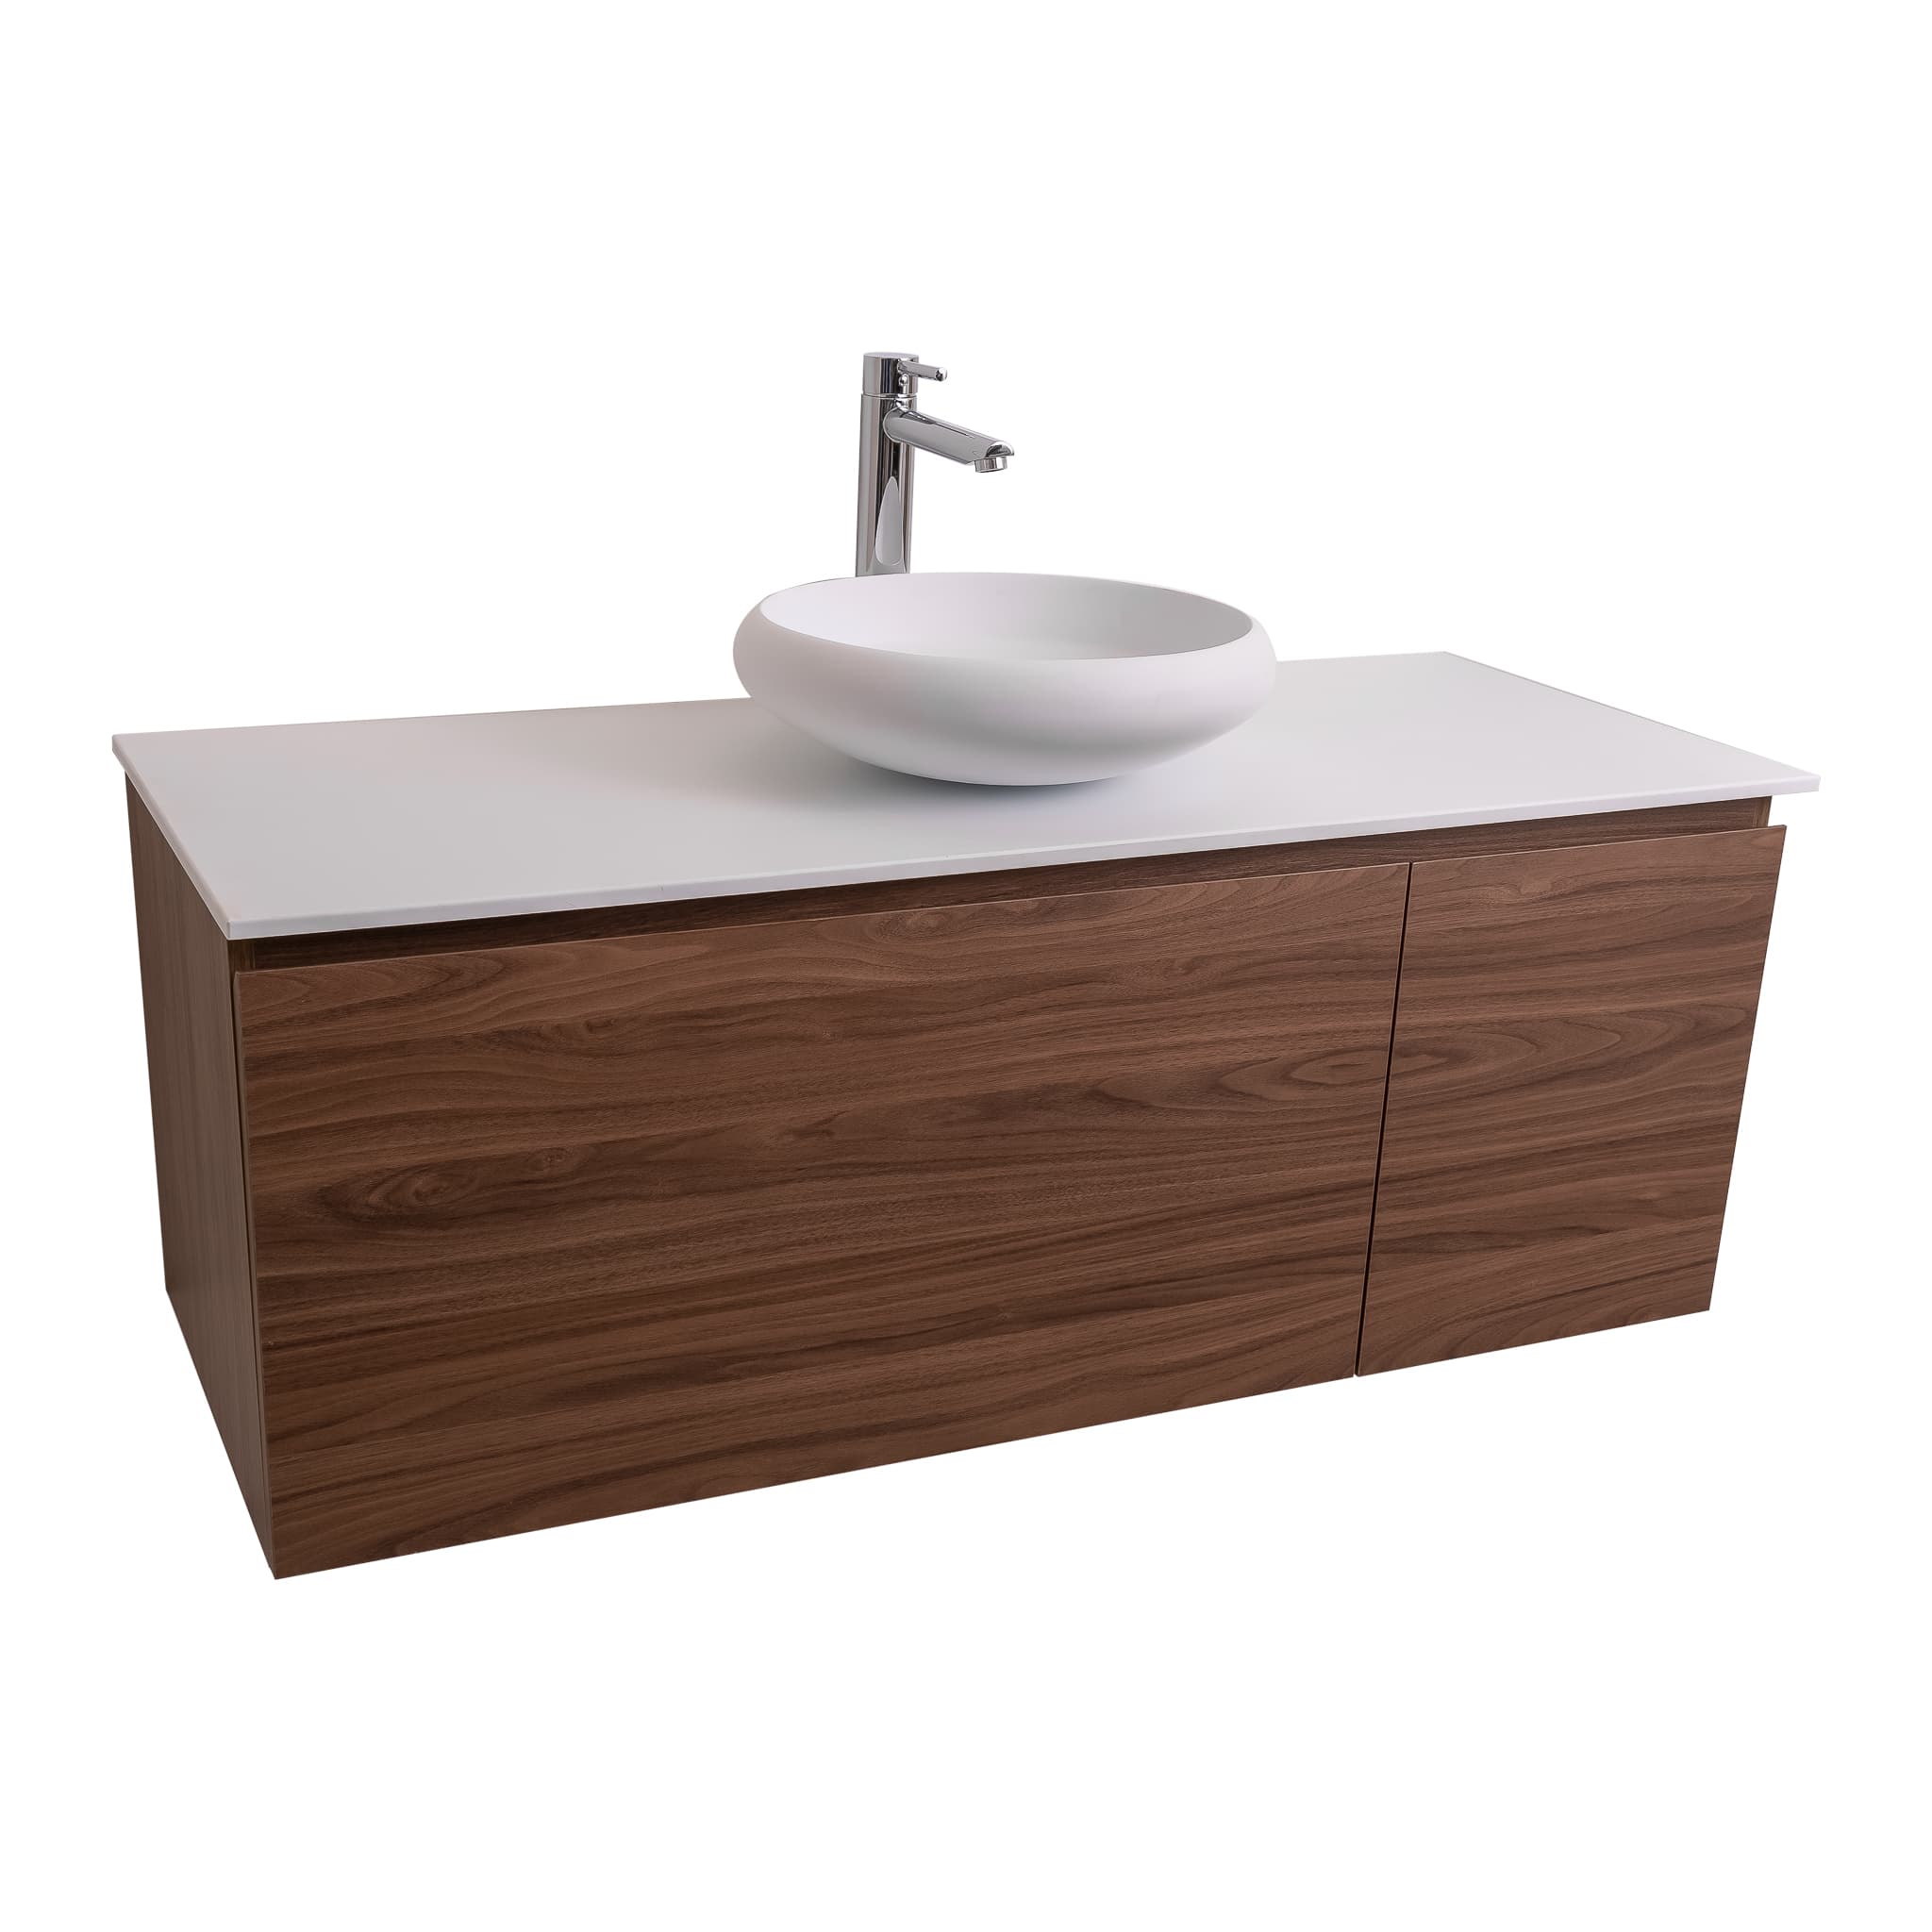 Venice 47.5 Walnut Wood Texture Cabinet, Solid Surface Flat White Counter And Round Solid Surface White Basin 1153, Wall Mounted Modern Vanity Set